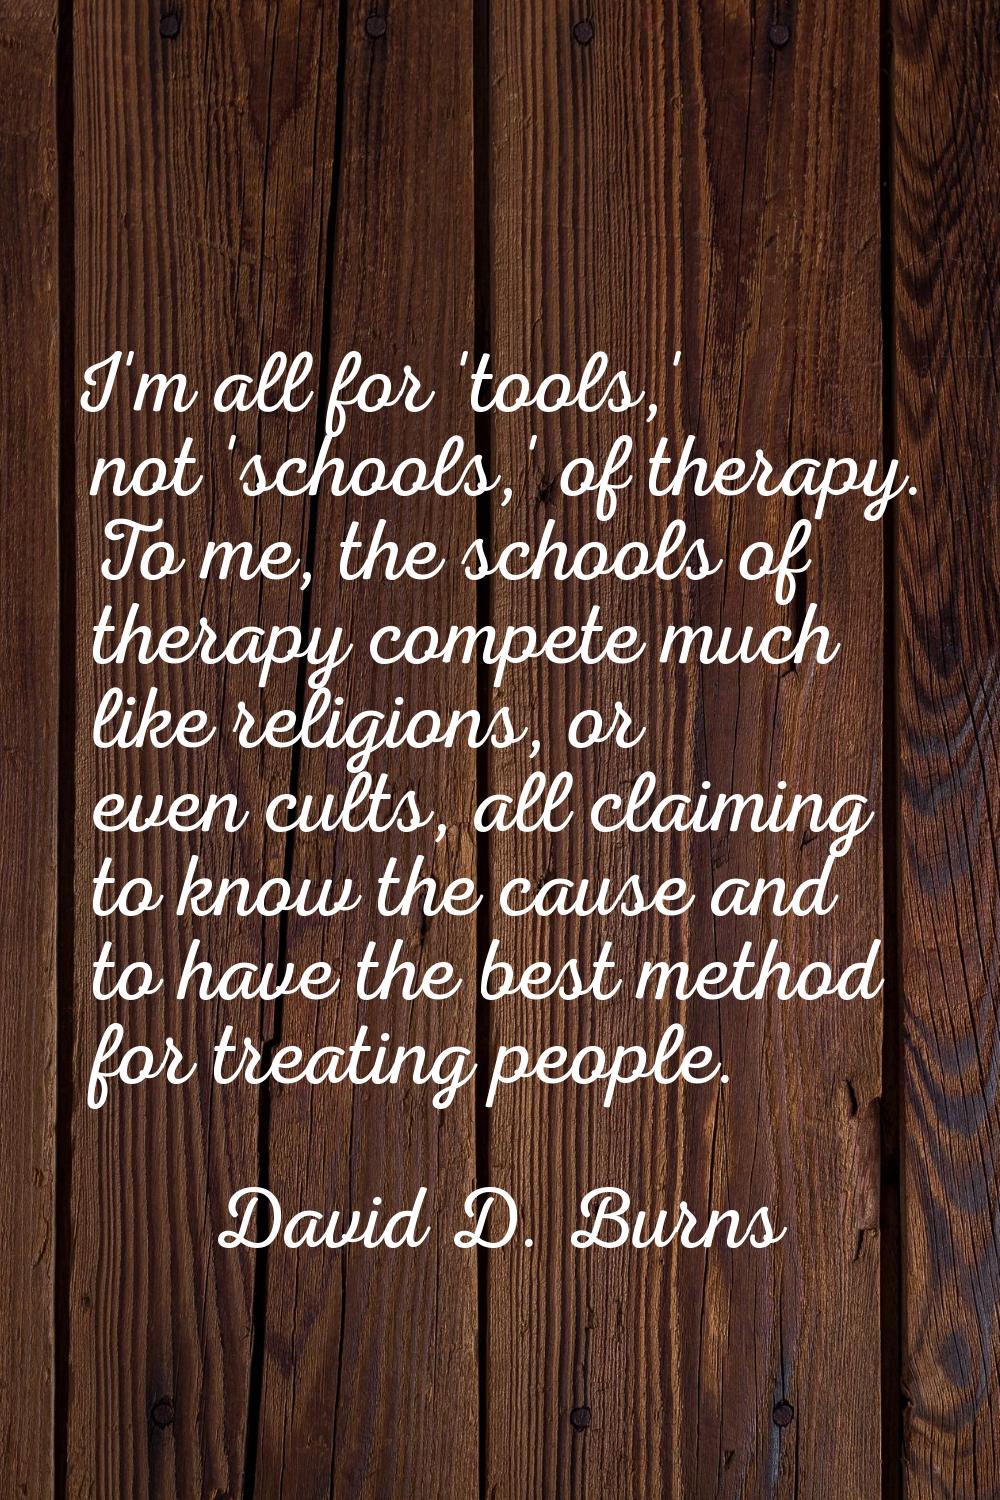 I'm all for 'tools,' not 'schools,' of therapy. To me, the schools of therapy compete much like rel